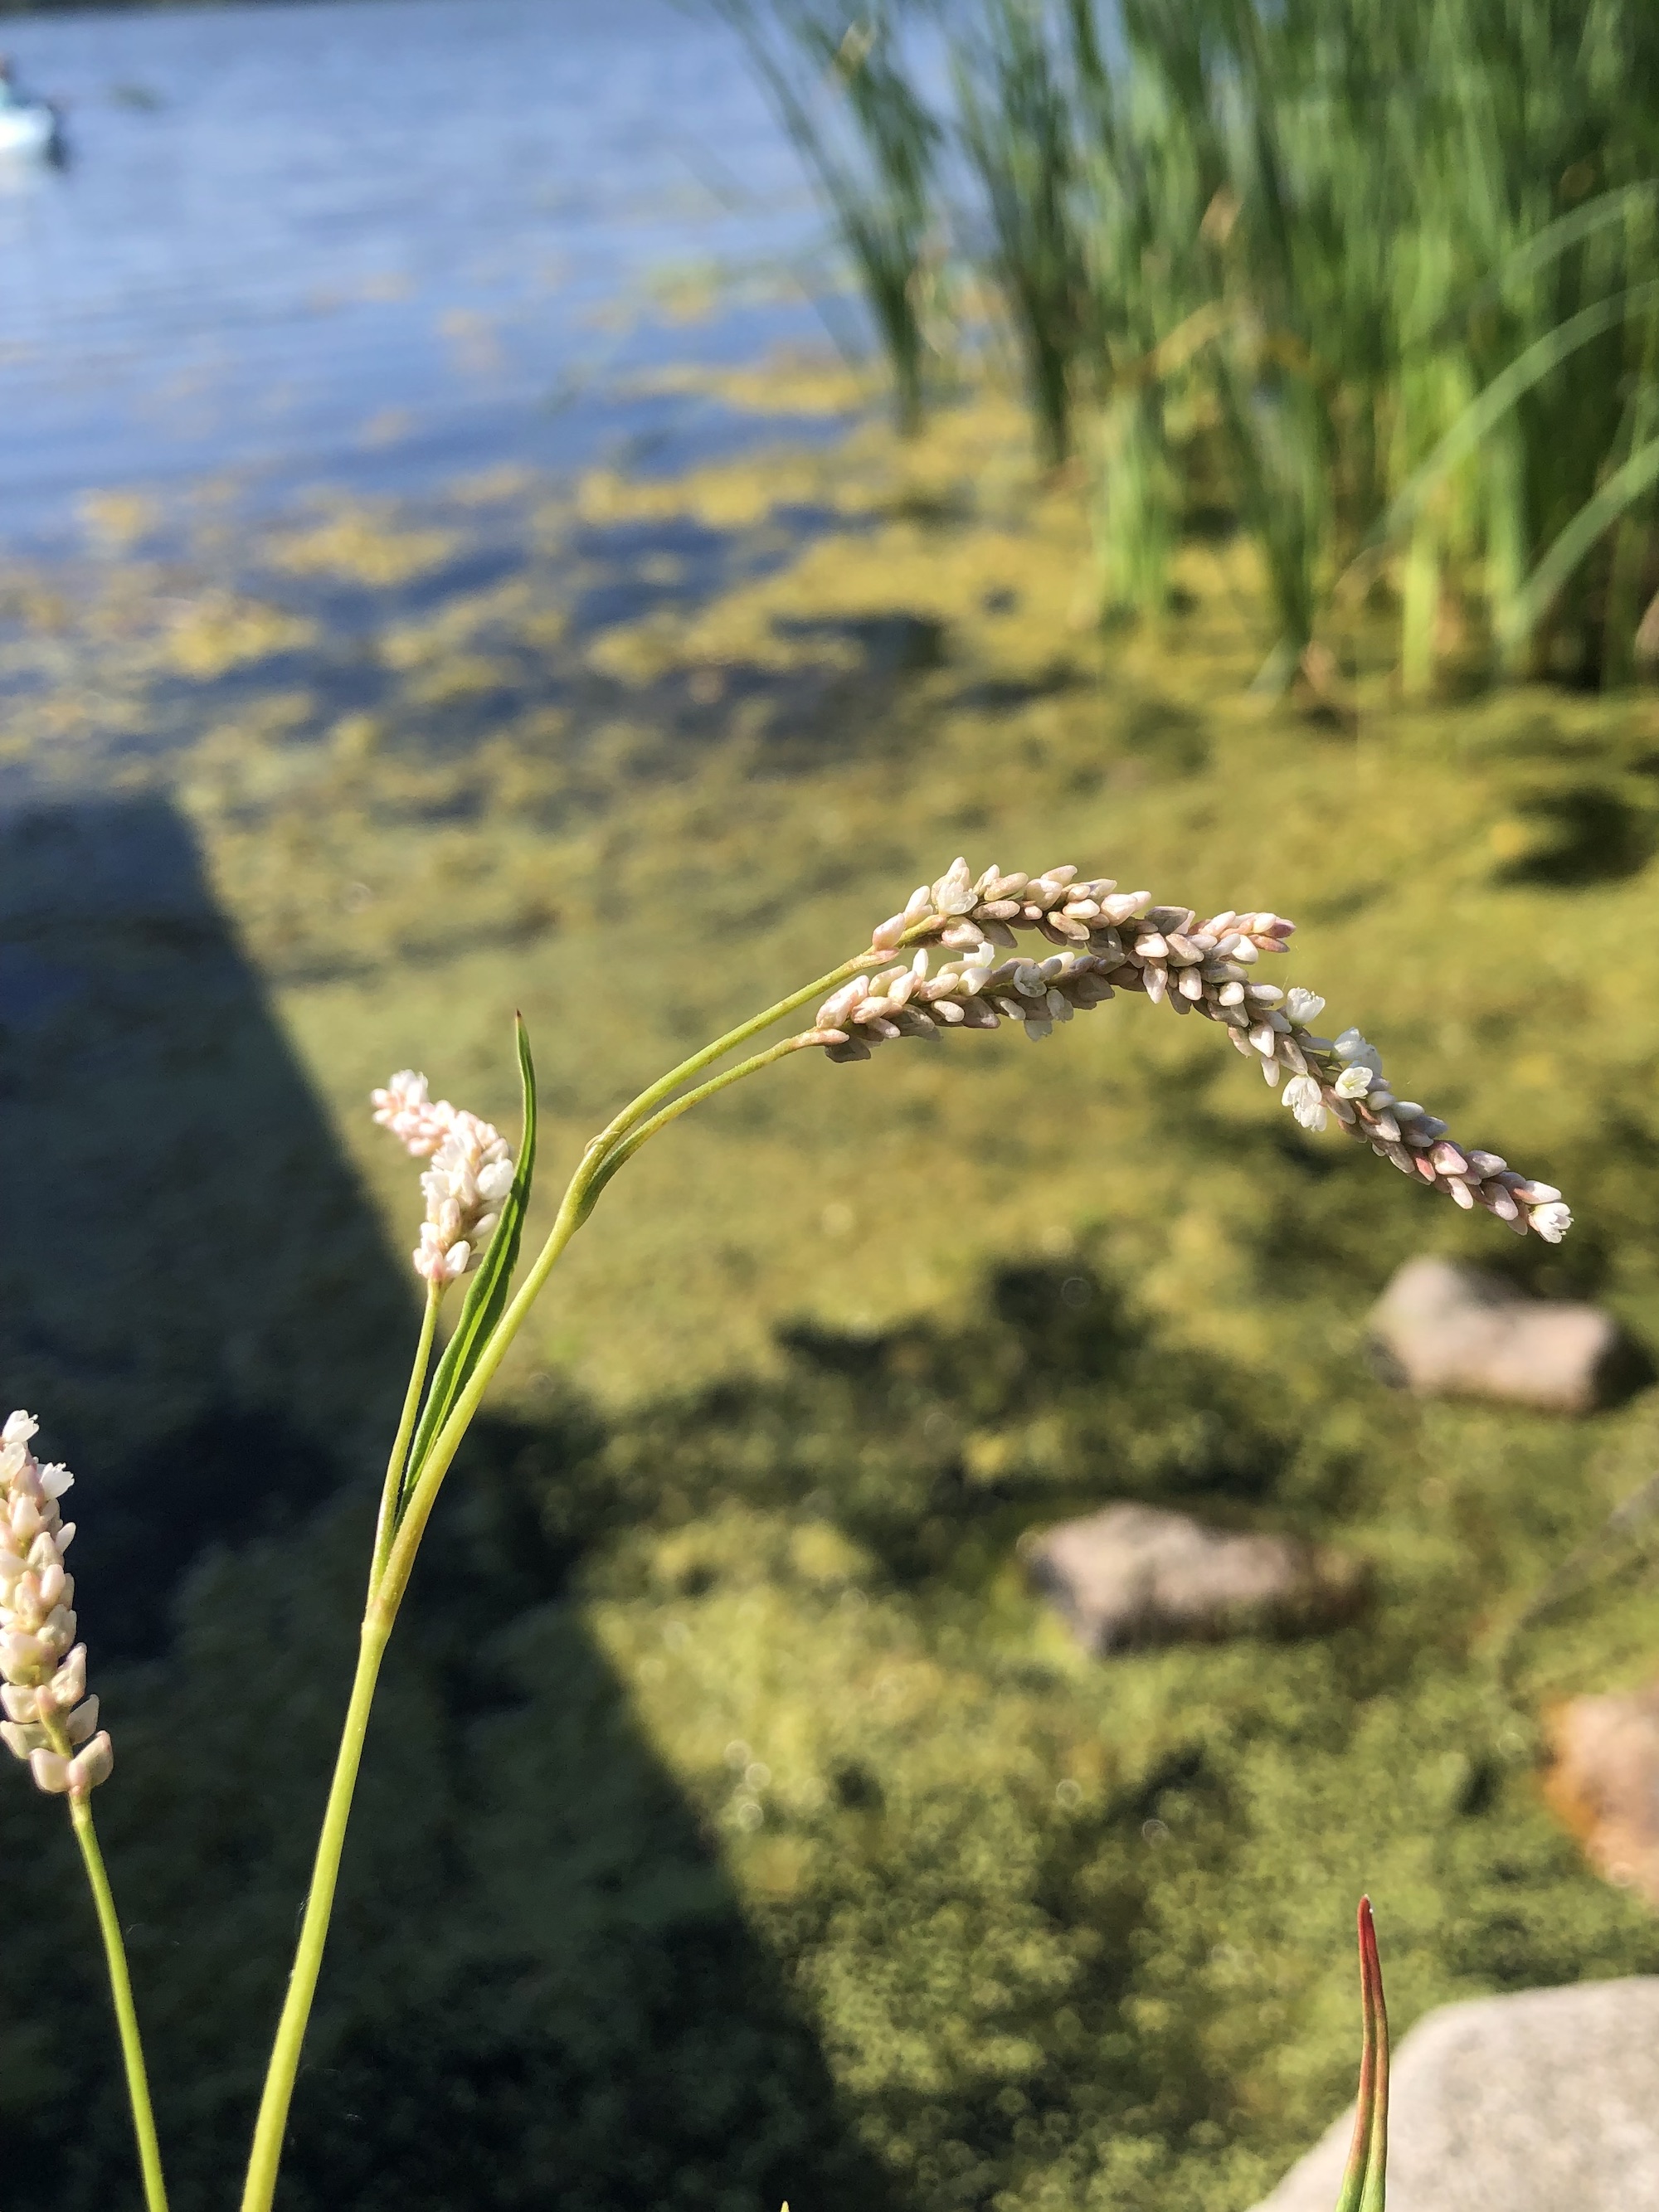 Nodding Smartweed on the shore of Lake Wingra in Wingra Park in Madison, Wisconsin on July 31, 2022.